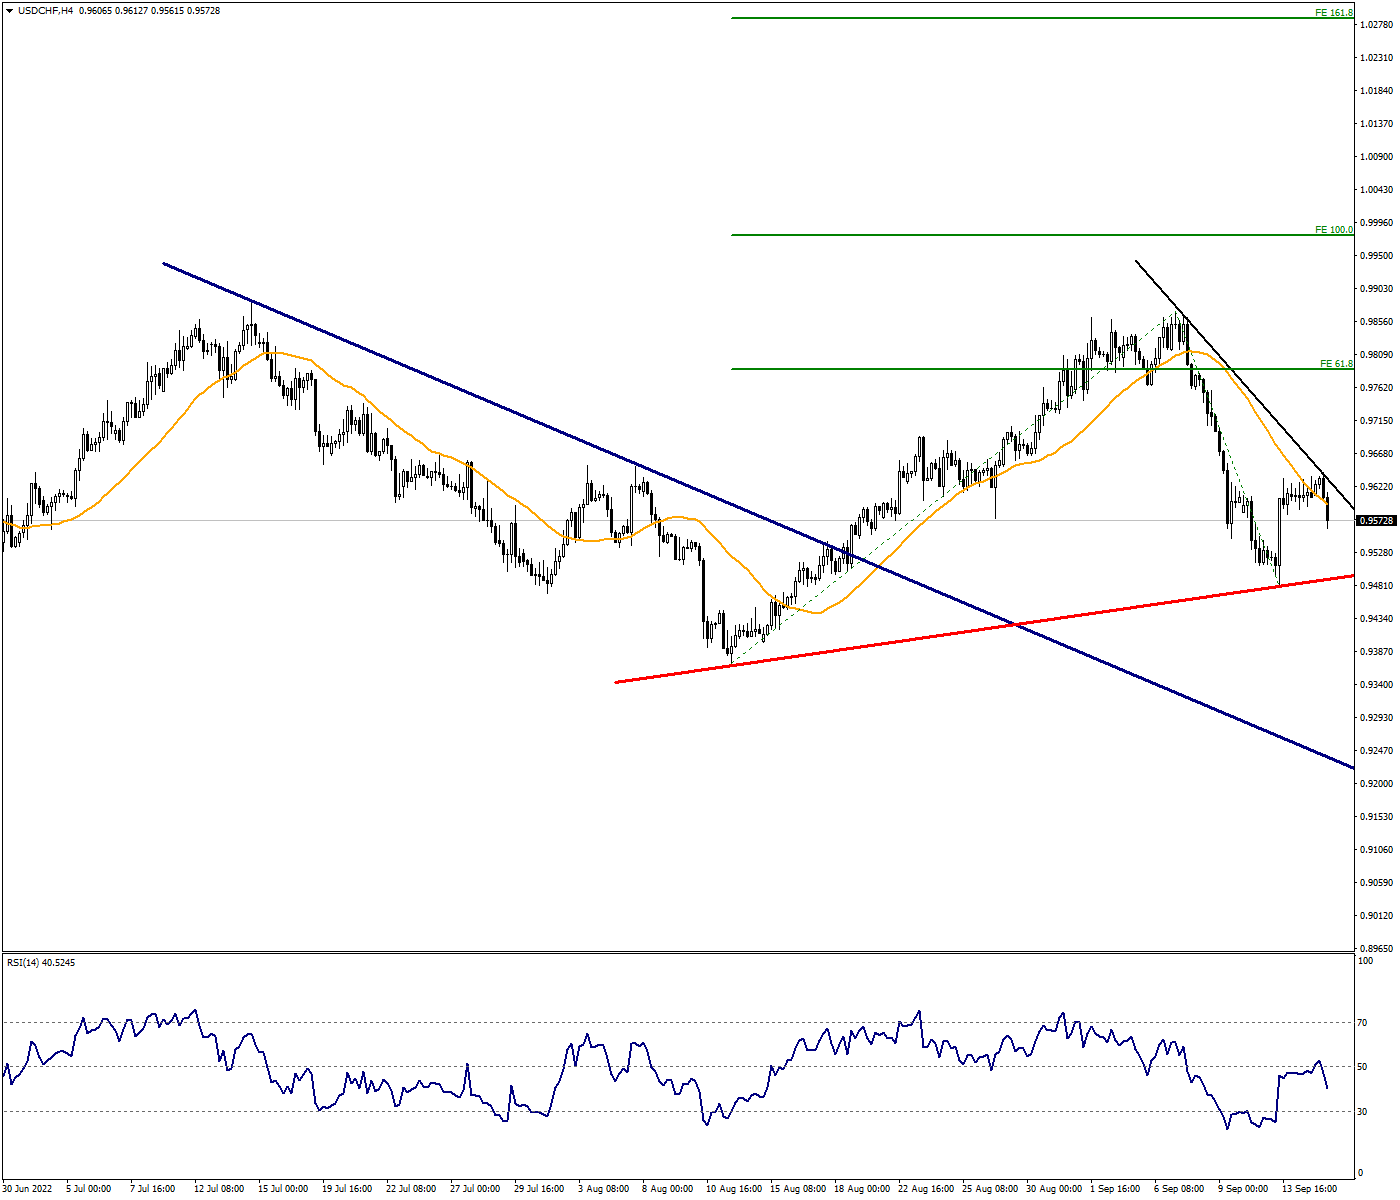 Currency Pressure May Increase at USDJPY